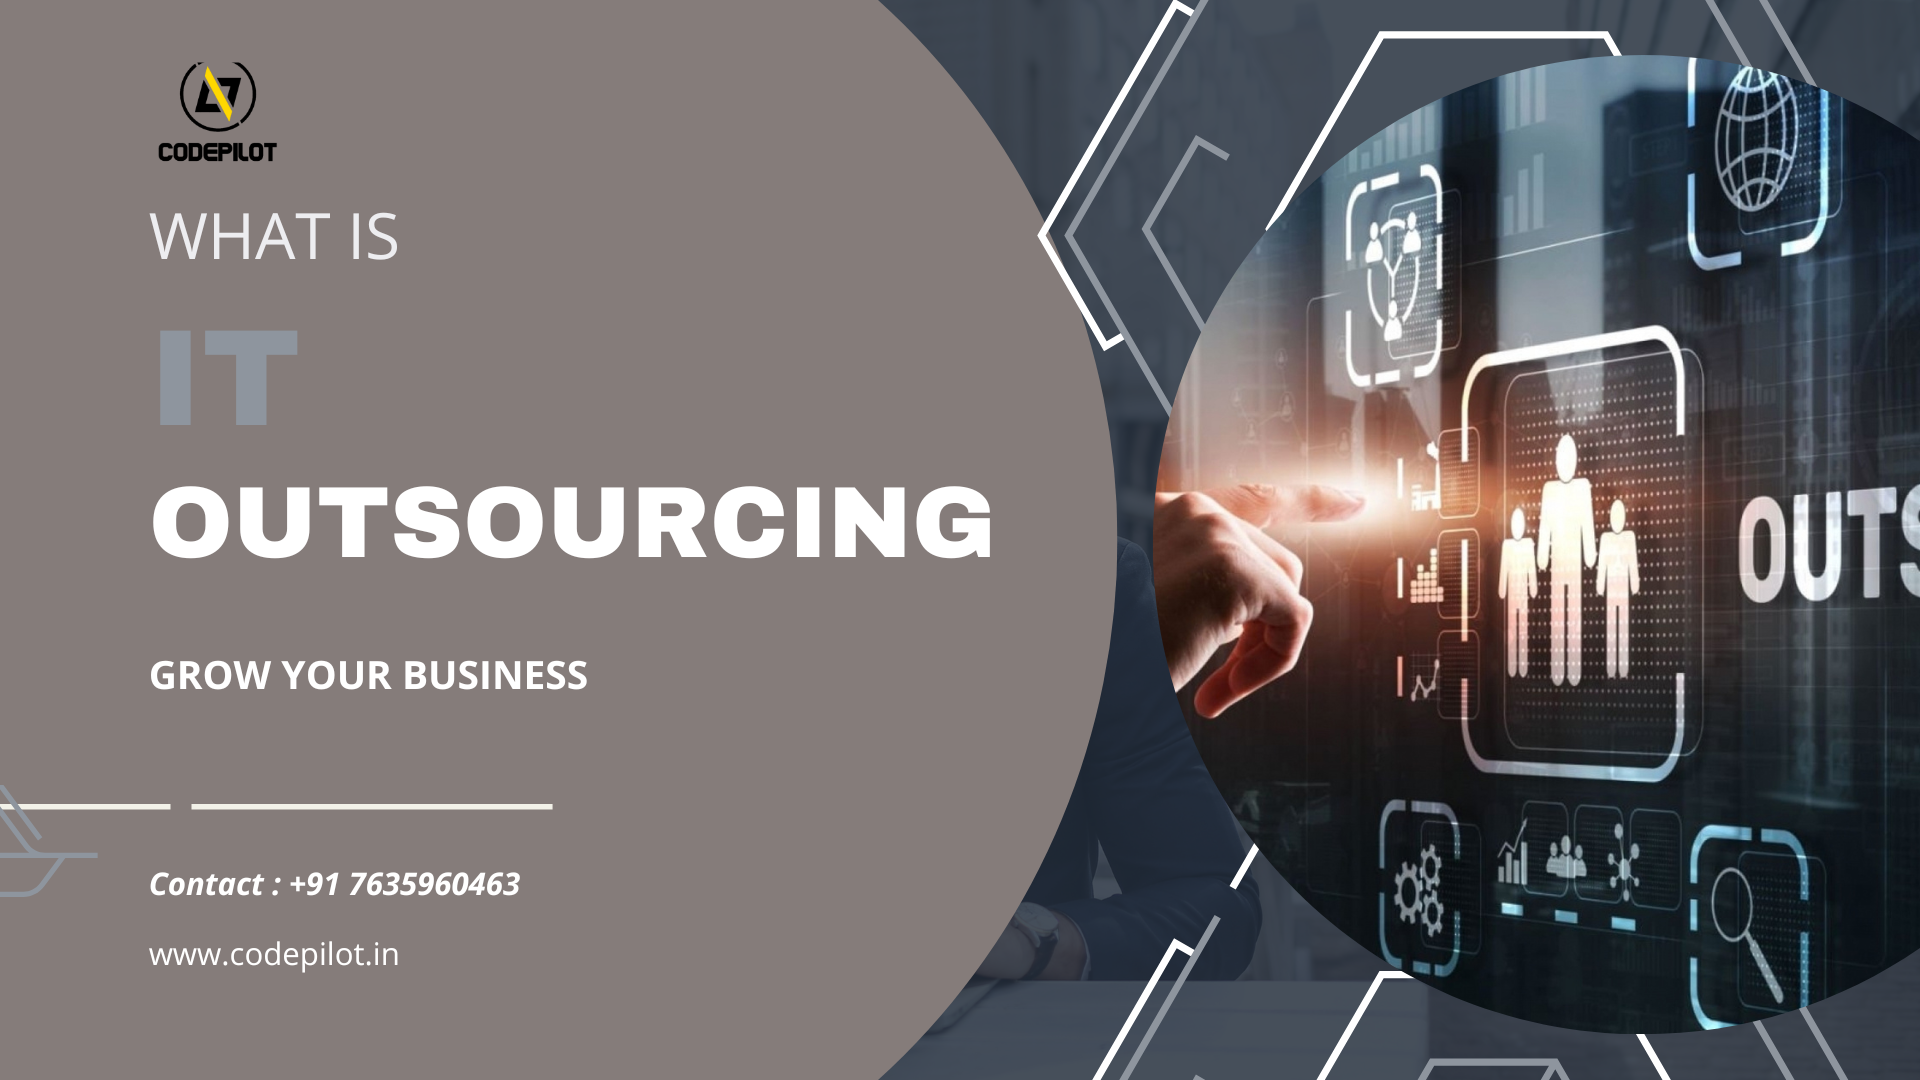 What is IT outsourcing and what are the primary advantages for your business?